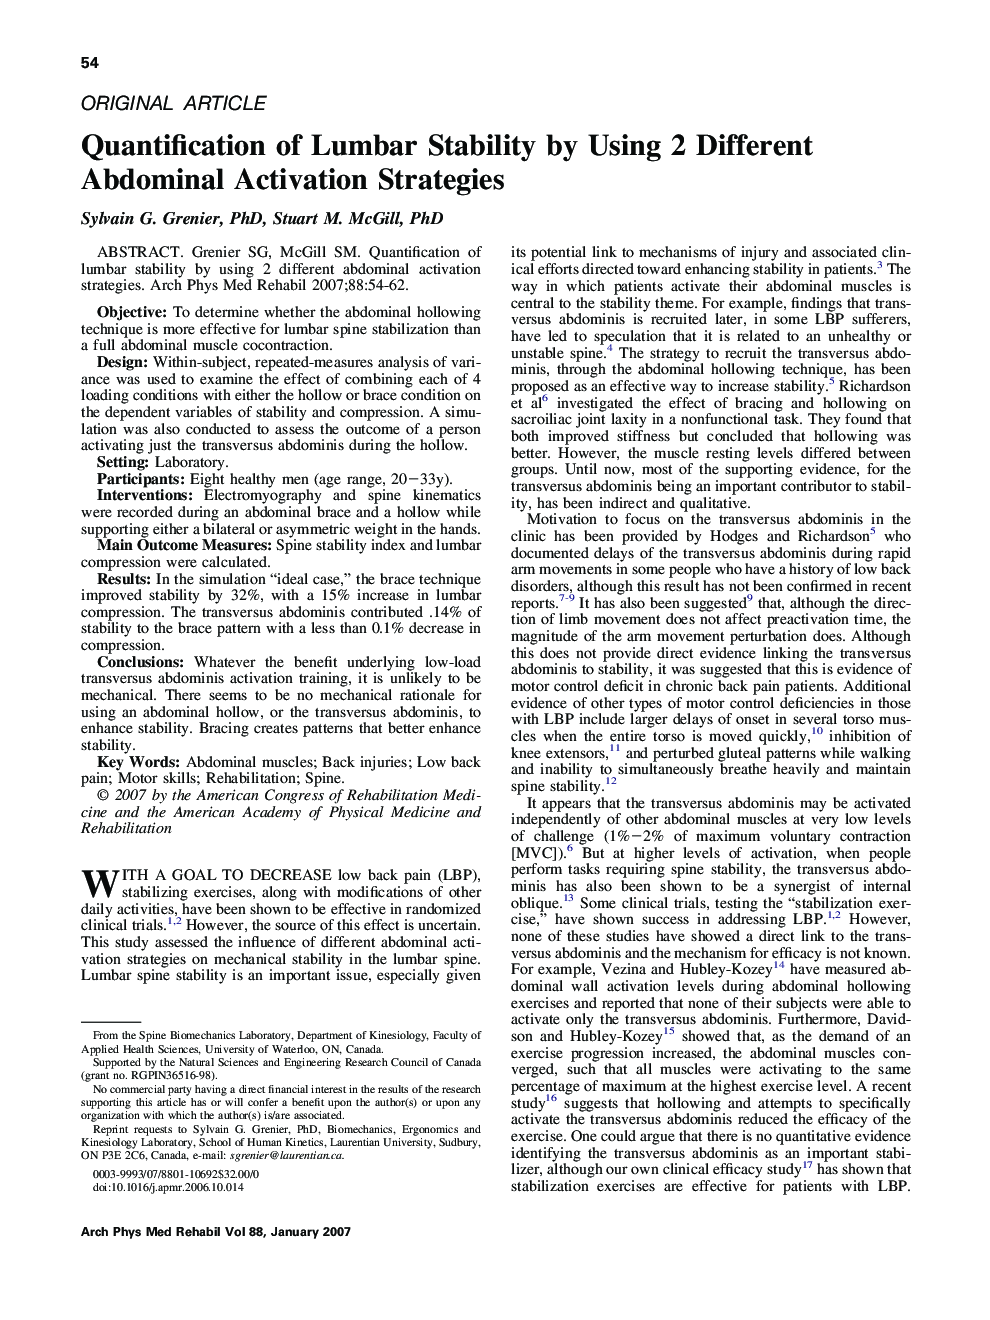 Quantification of Lumbar Stability by Using 2 Different Abdominal Activation Strategies 